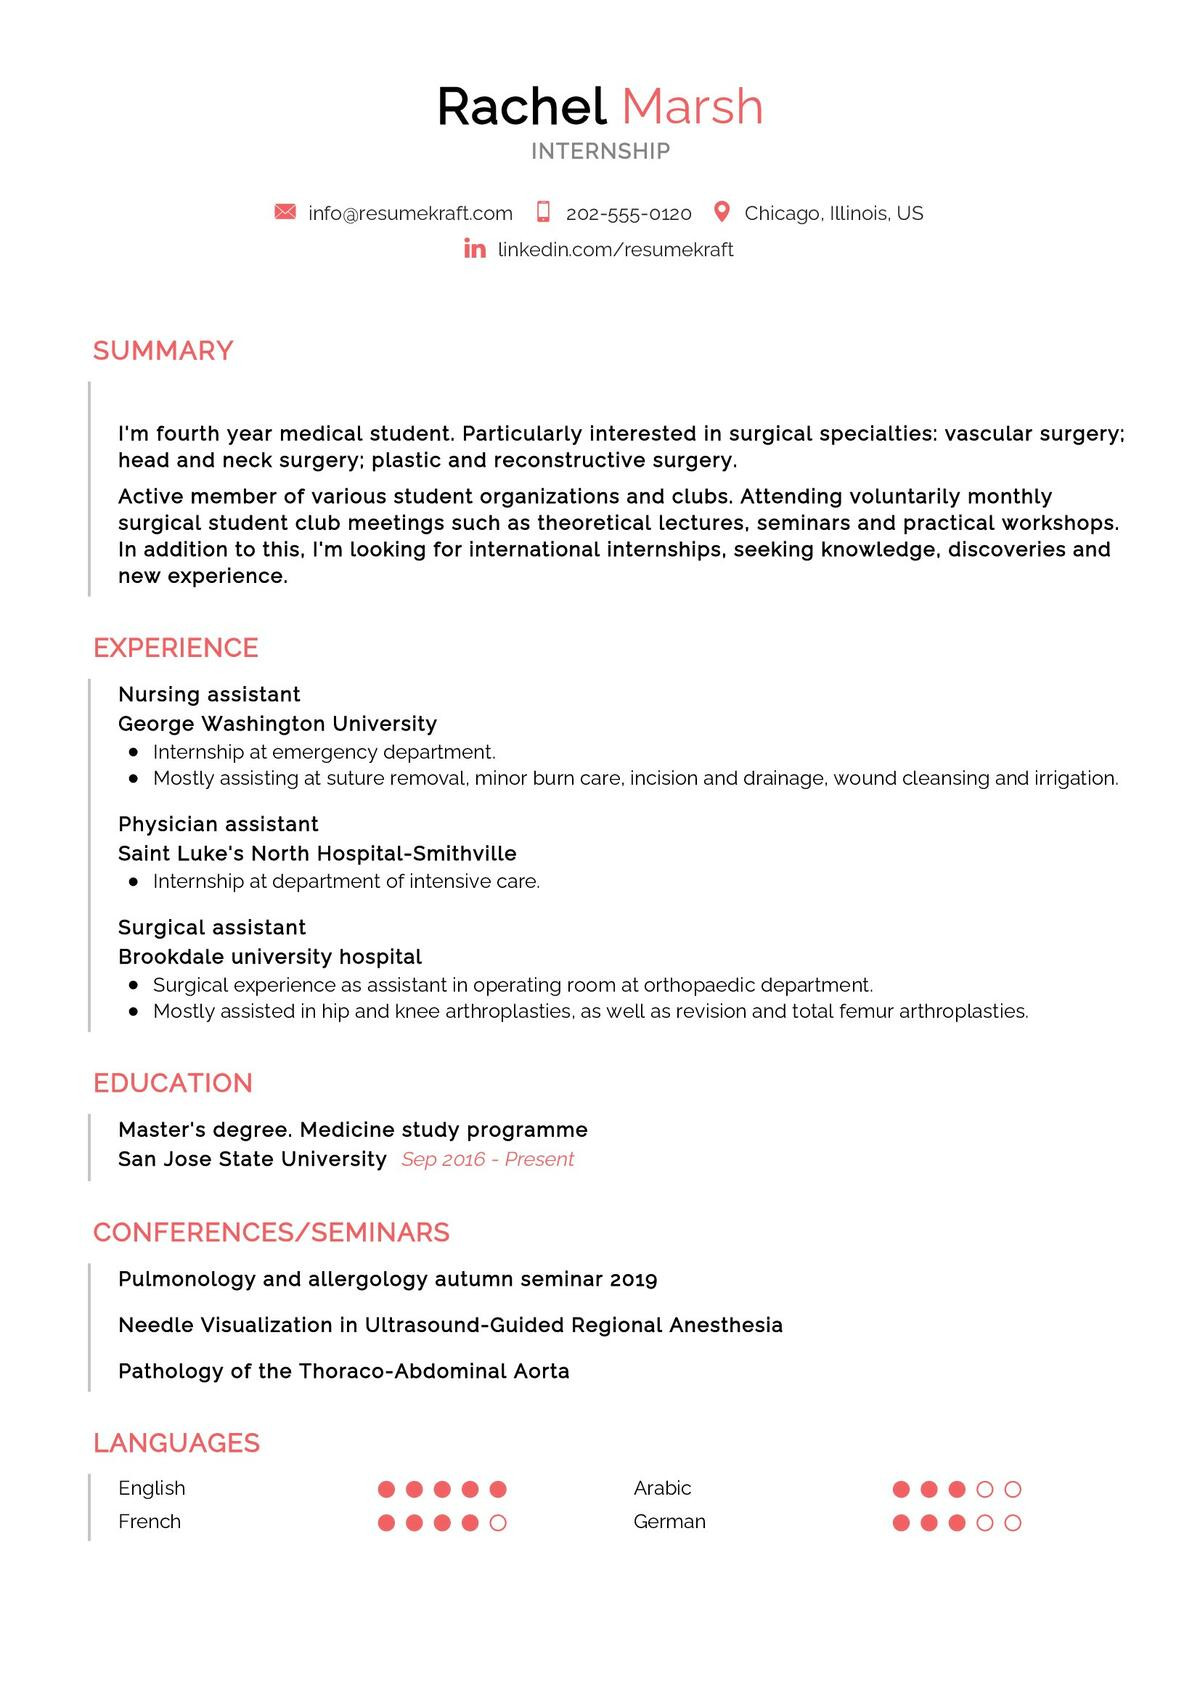 Resume Samples that Include Internship Experience Internship Resume Sample 2021 Writing Guide & Tips – Resumekraft